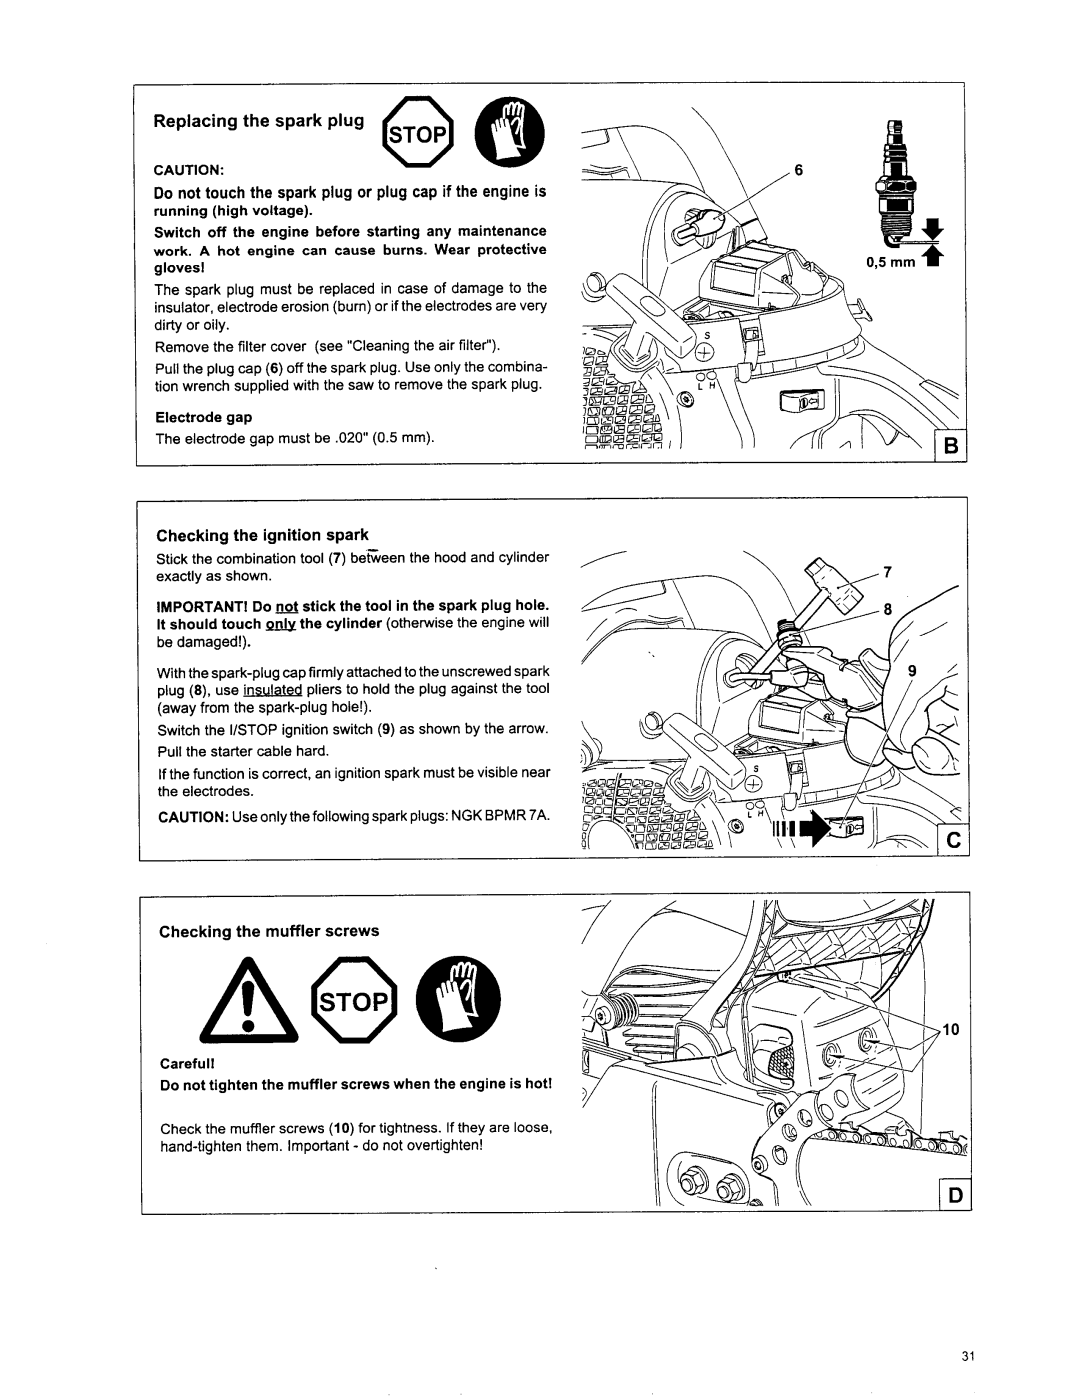 Makita DCS 7901, DCS6401, DCS 7300 manual Replacing the spark plug, Do not touch the spark plug or plug cap if the engine is 